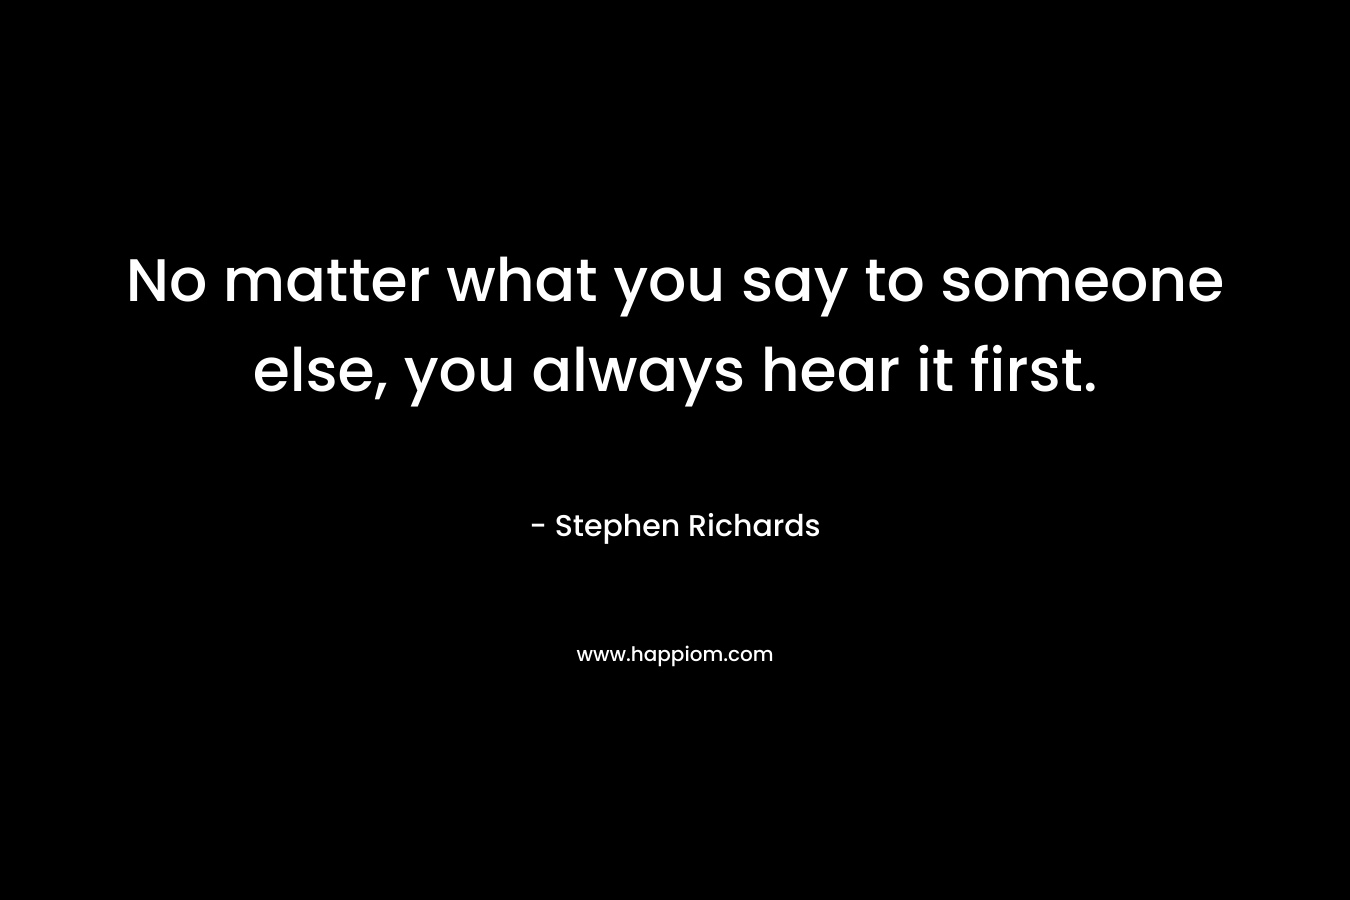 No matter what you say to someone else, you always hear it first.